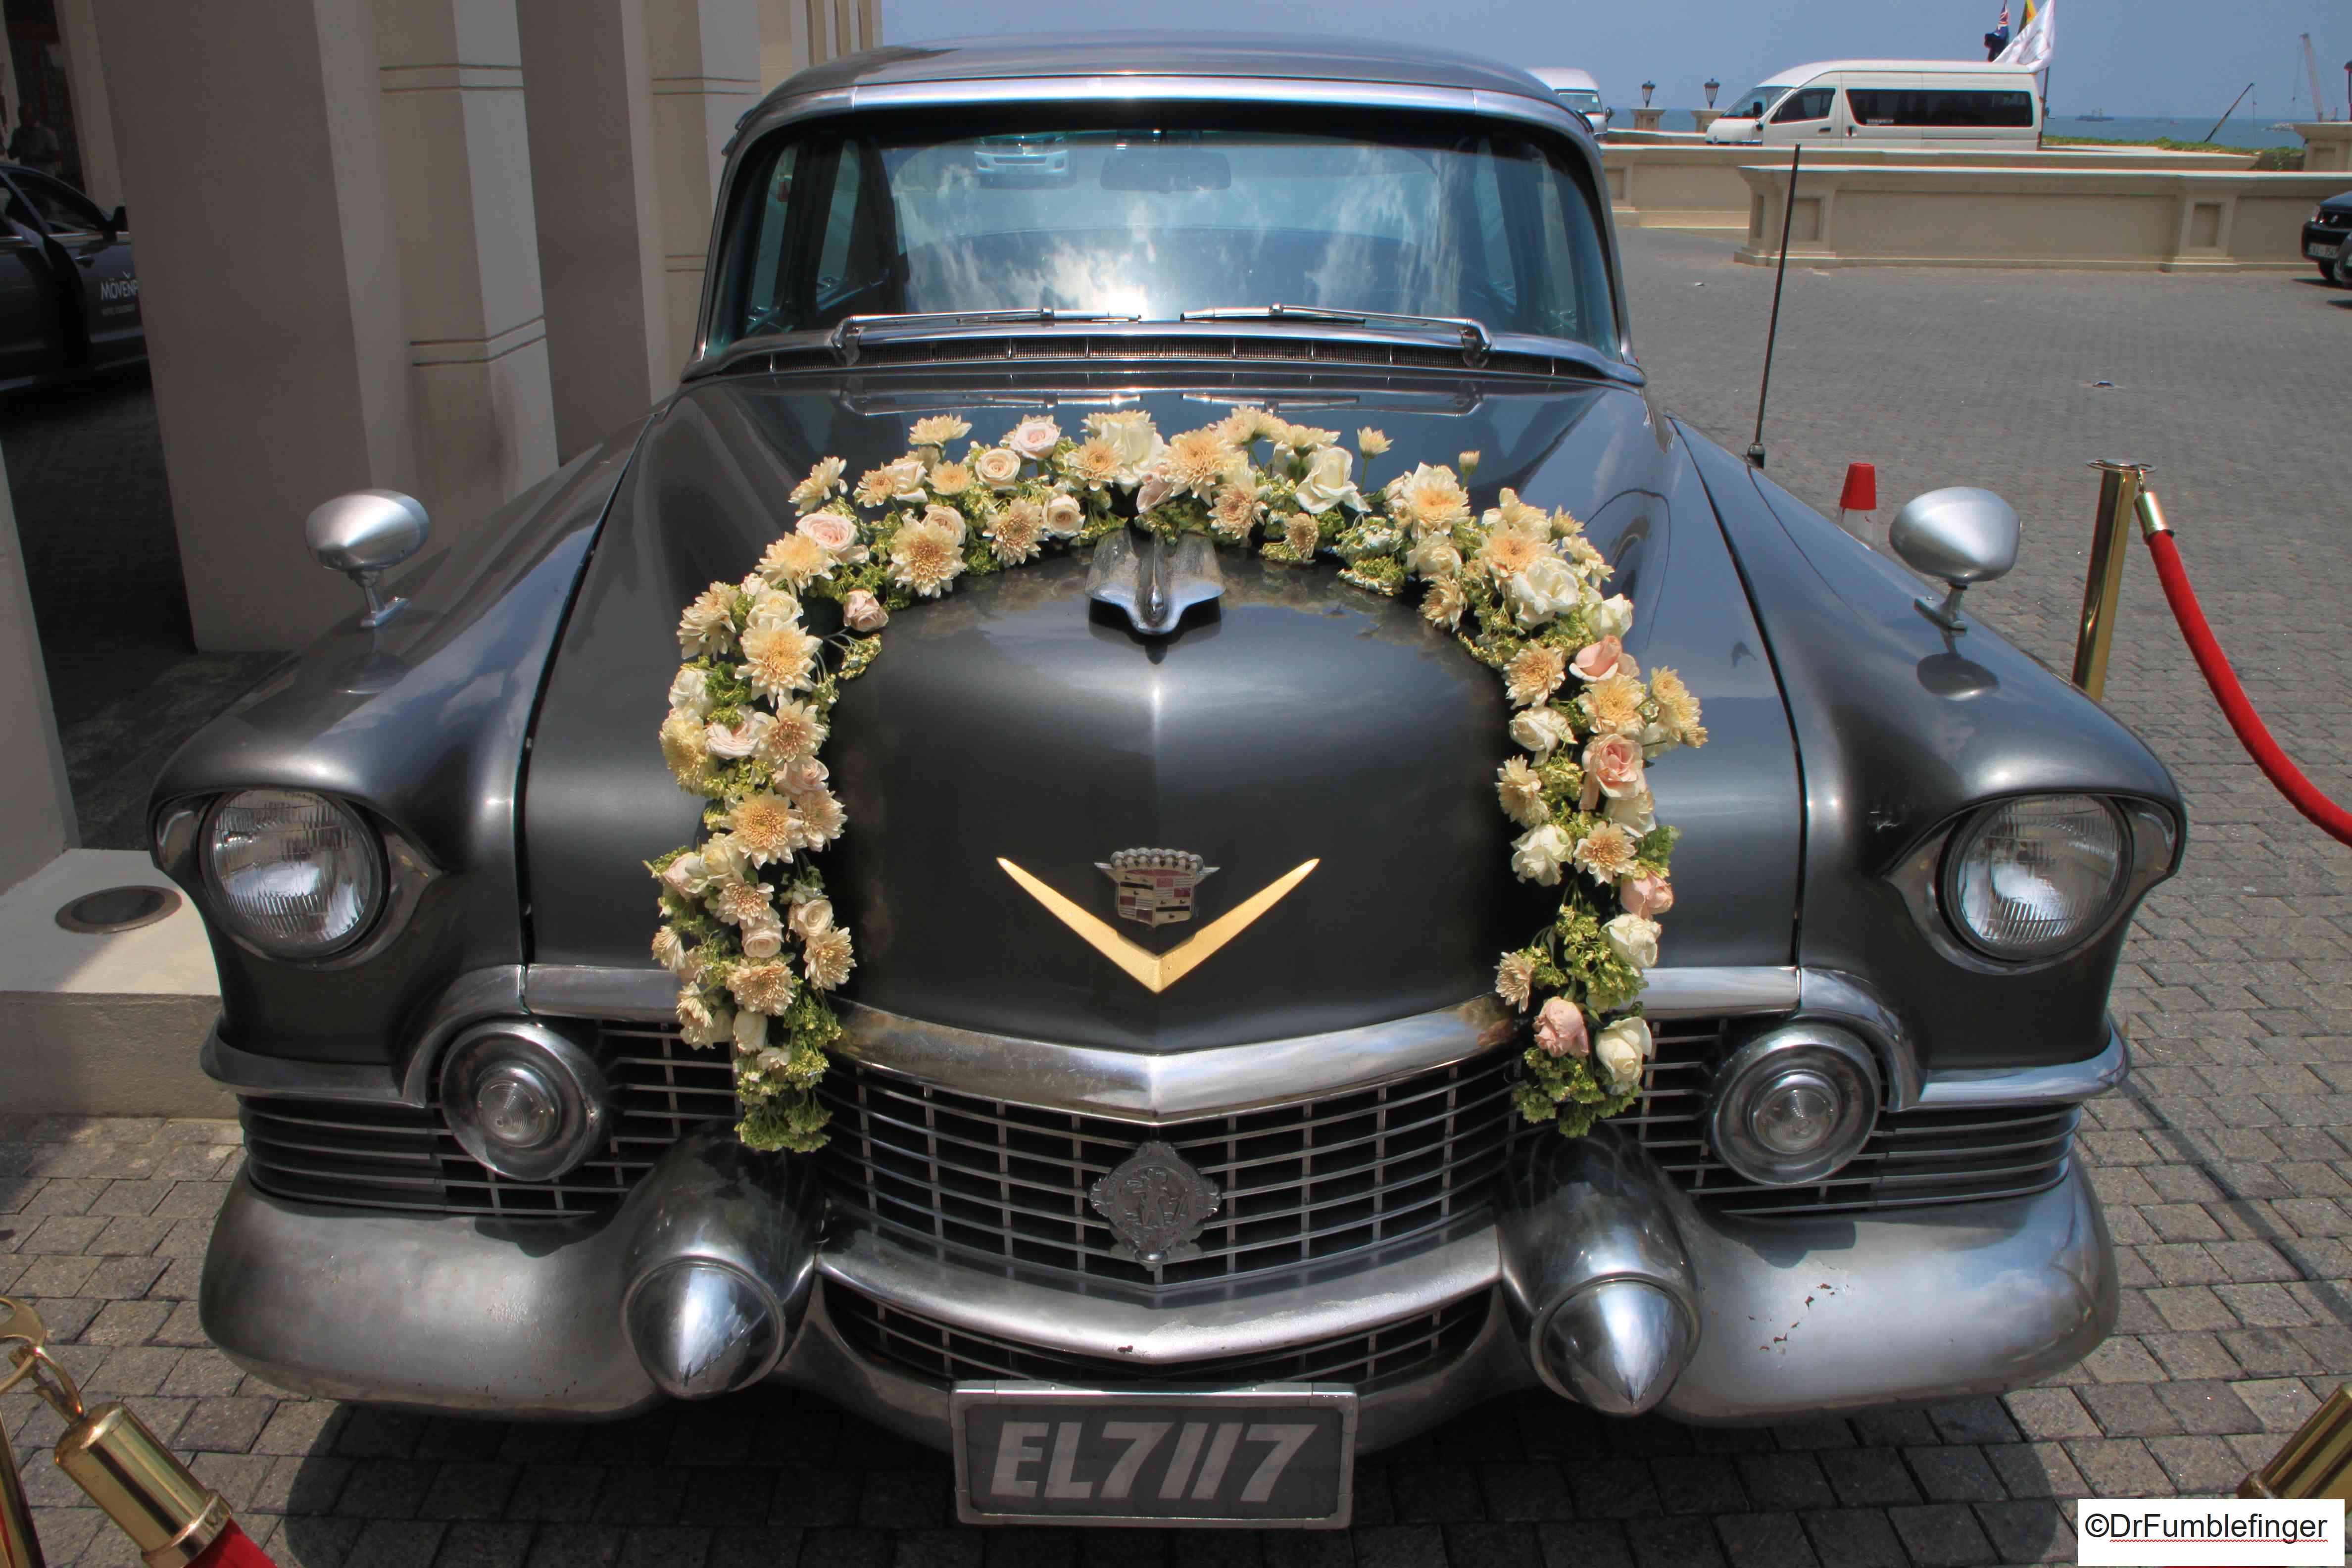 Classic Cadillac, Galle Face Hotel, Colombo